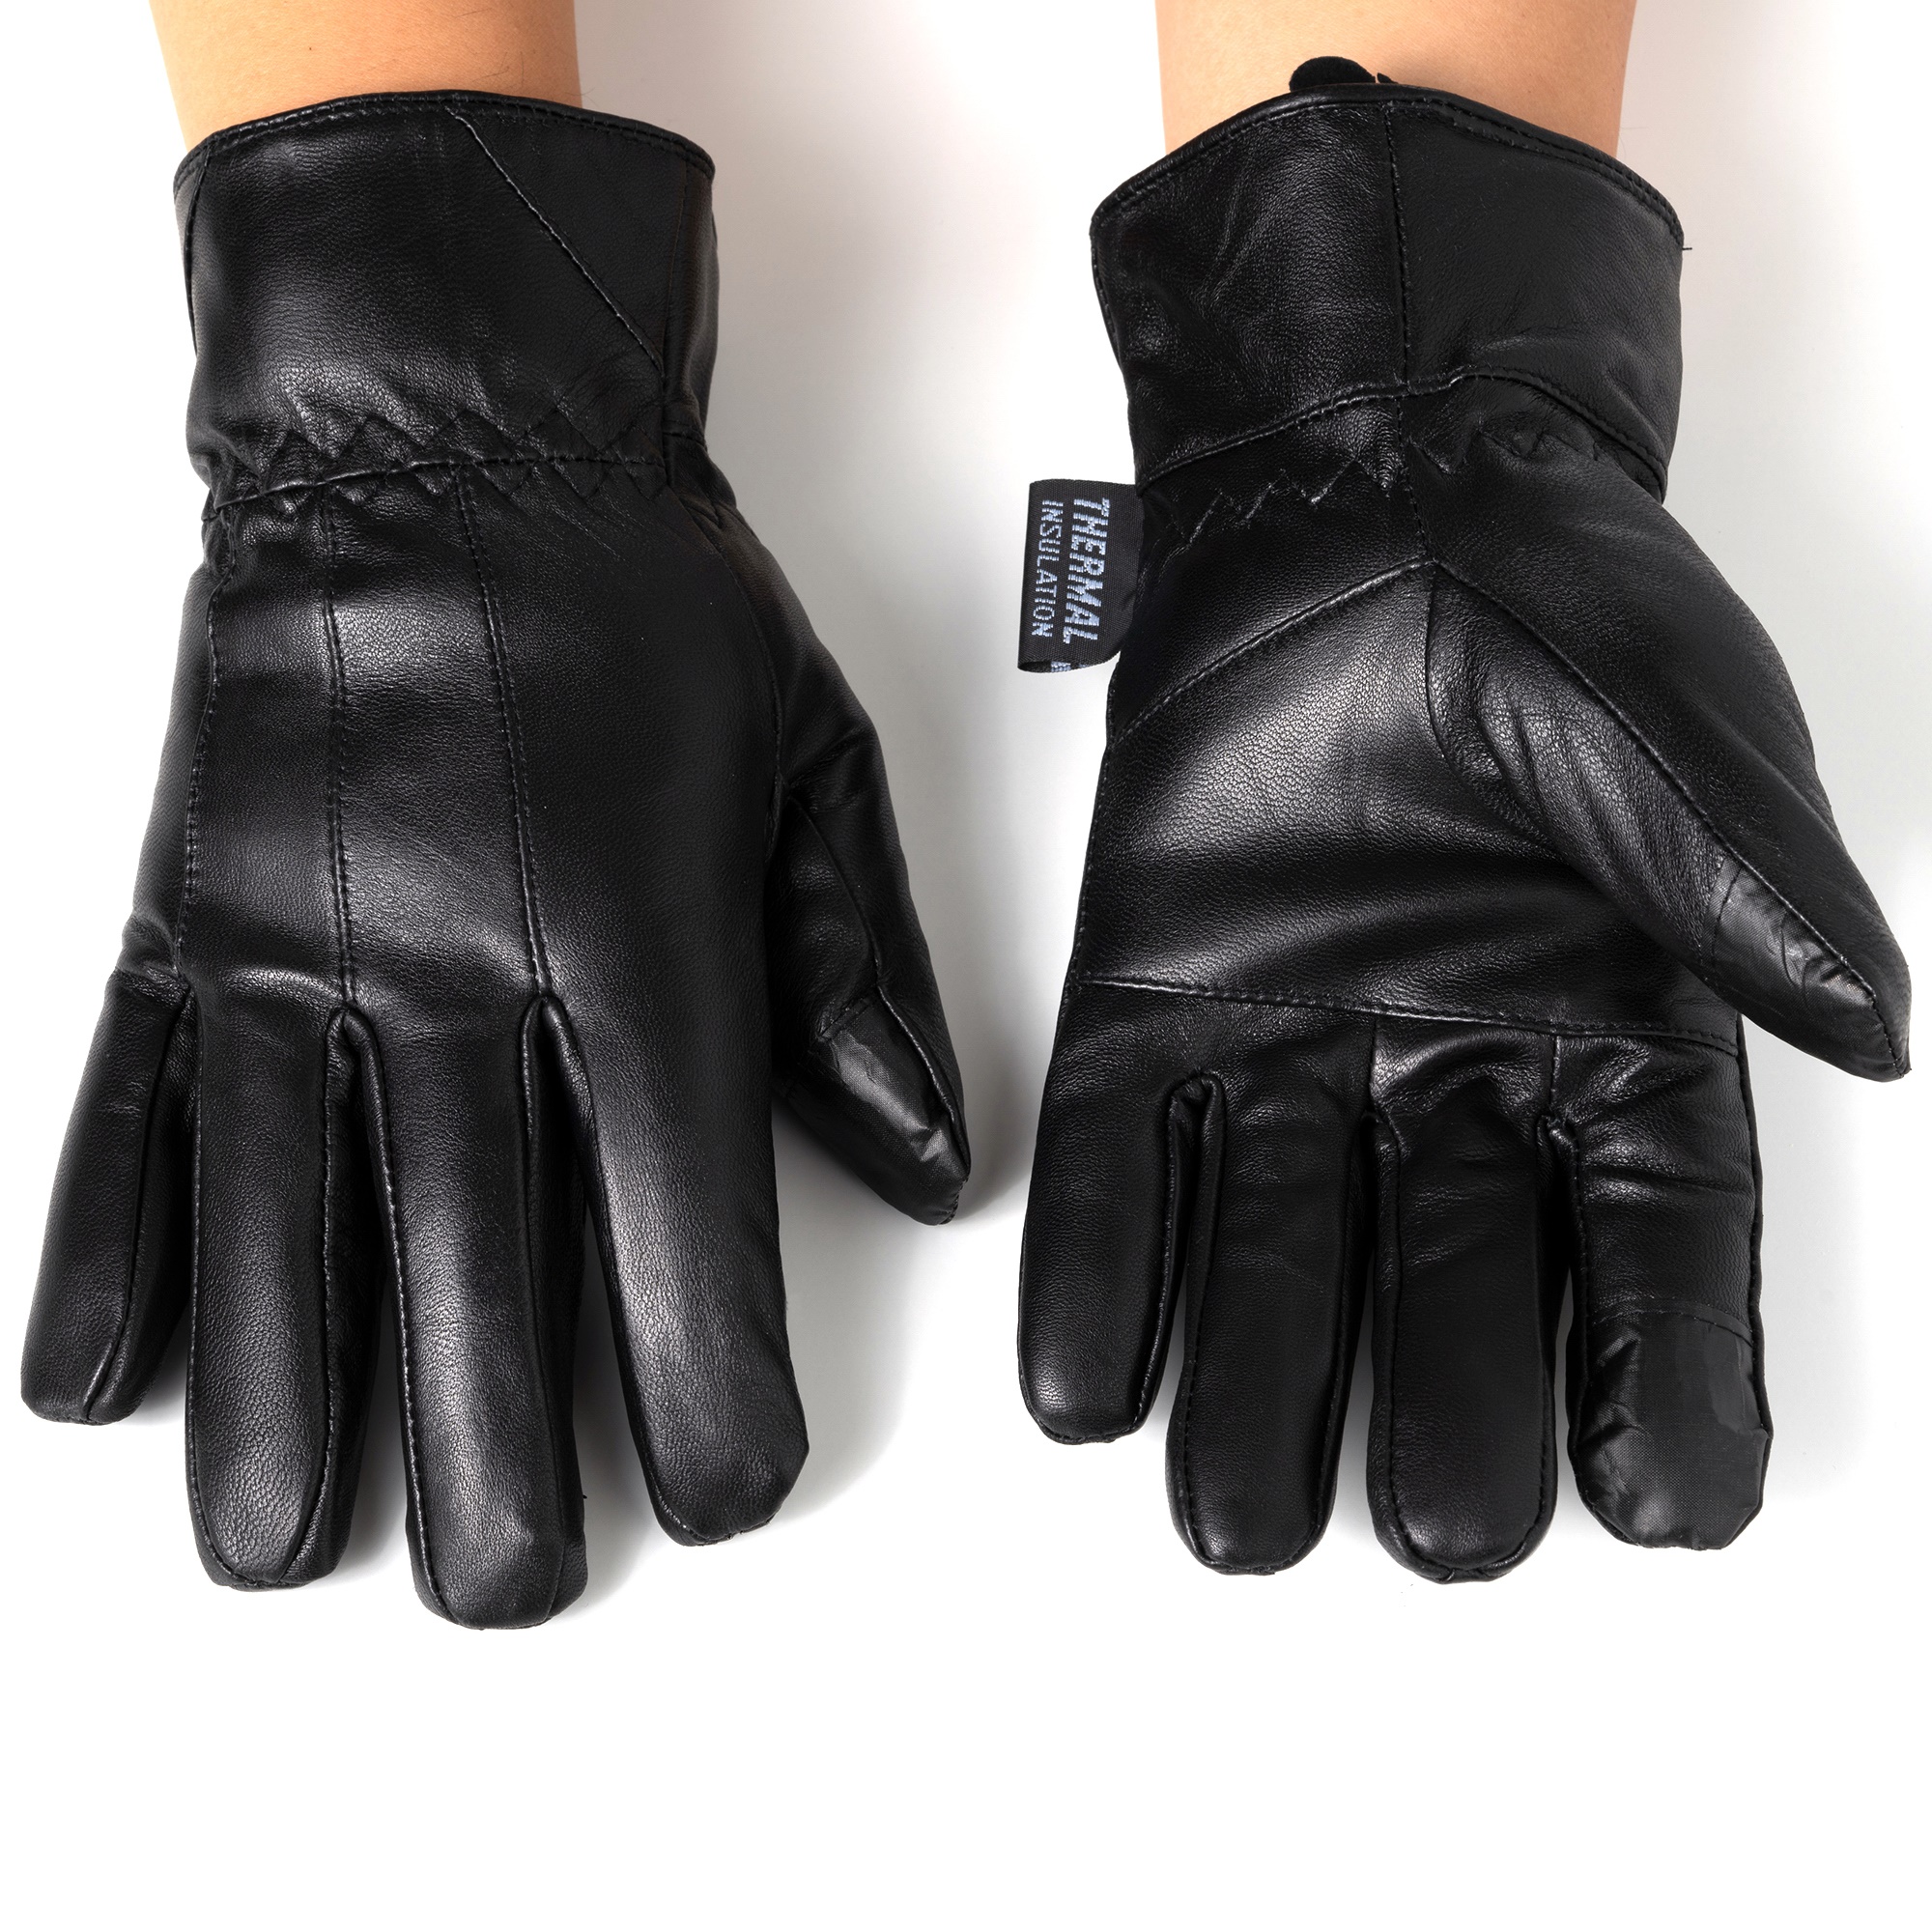 Alpine Swiss Mens Touch Screen Gloves Leather Thermal Lined Phone Texting Gloves - image 4 of 7